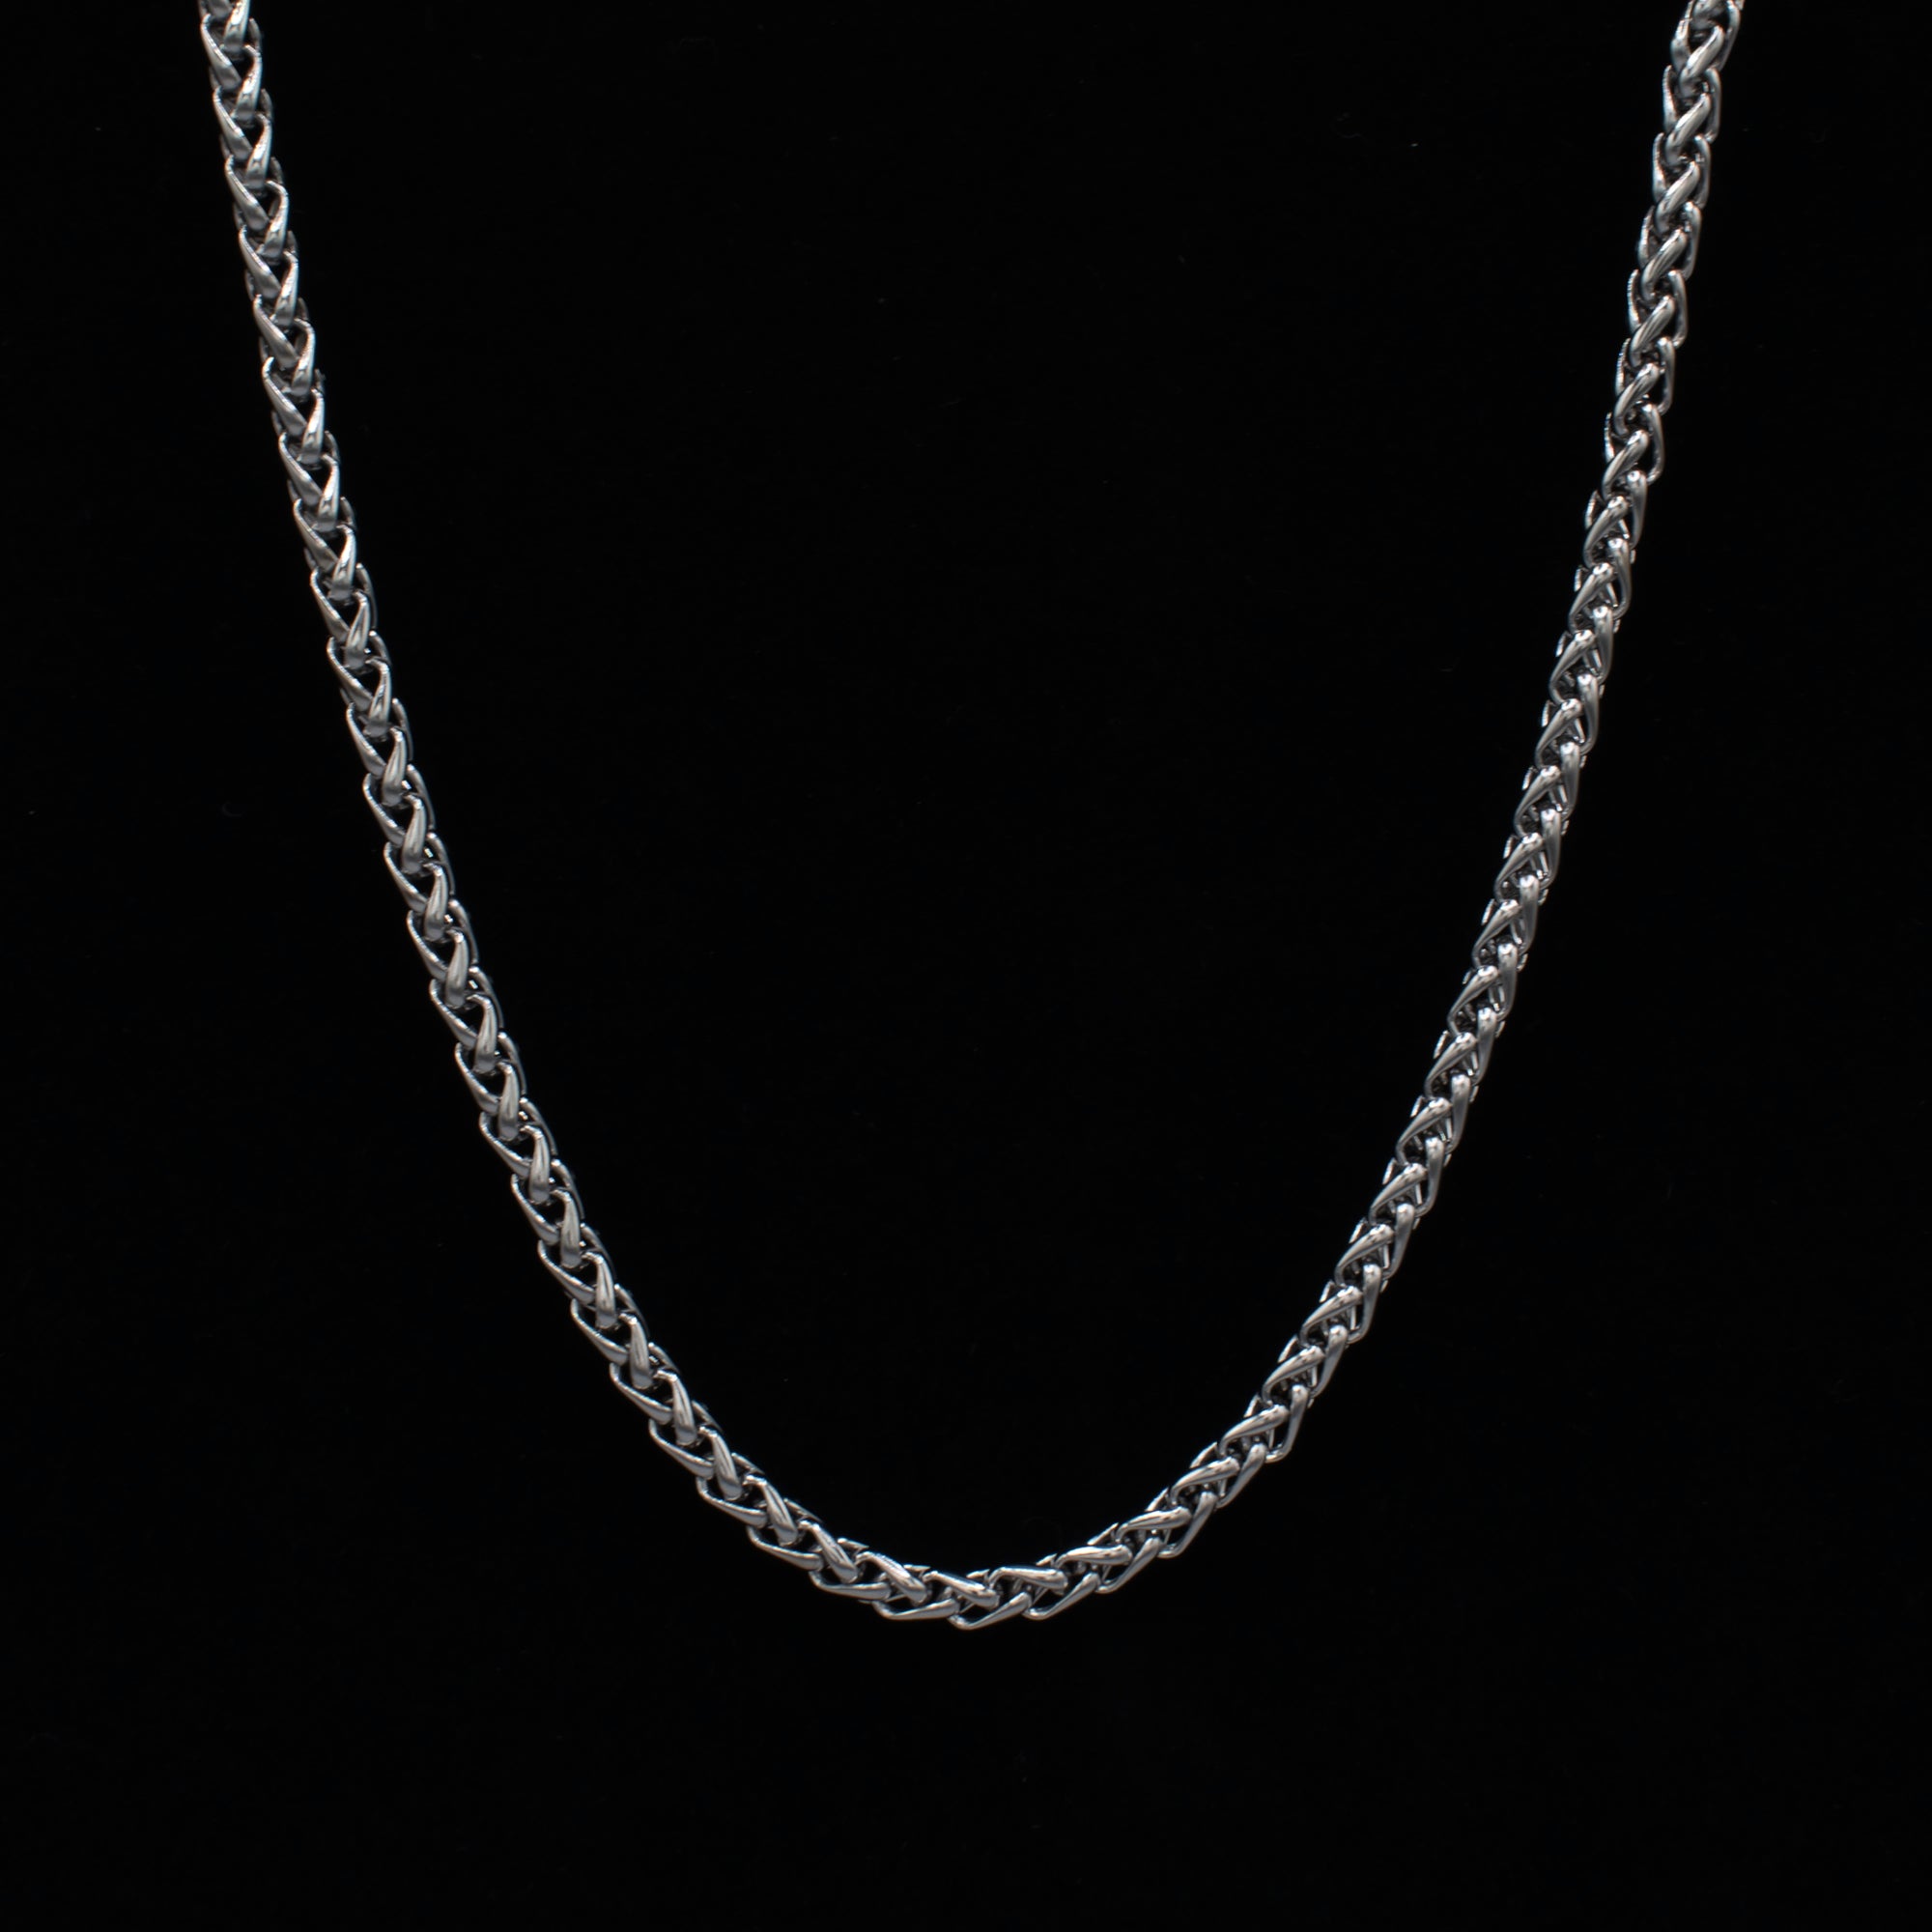 Silver Foxtail Necklace - 5mm